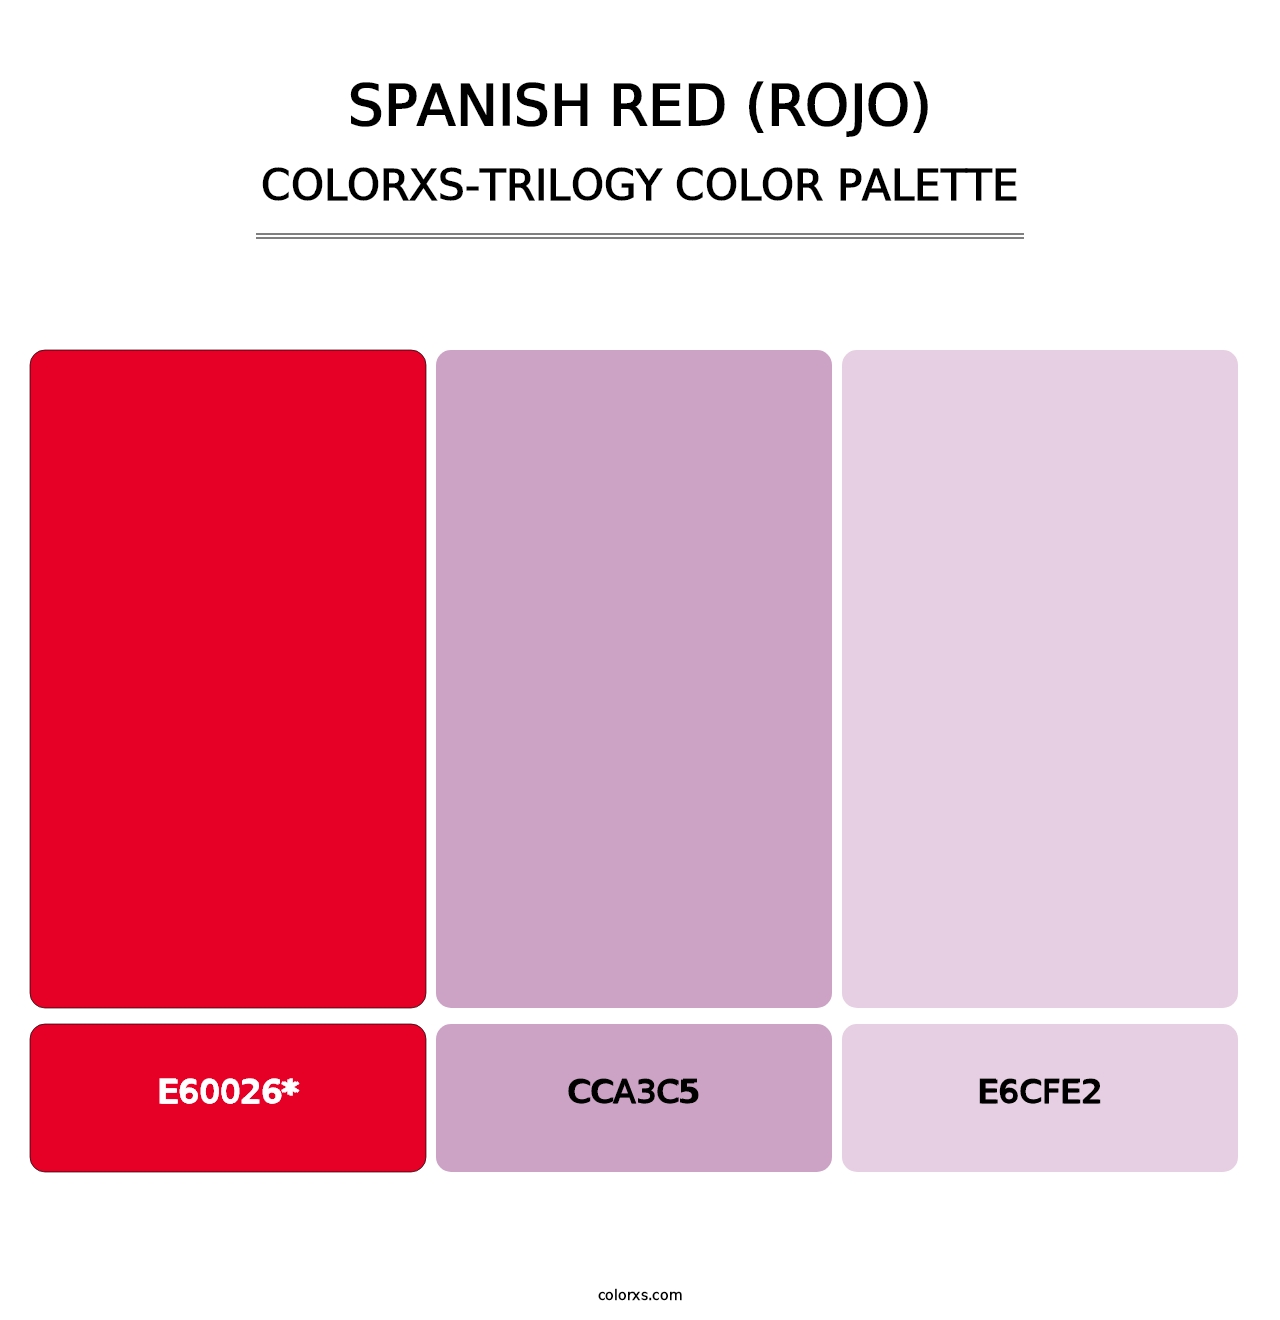 Spanish Red (Rojo) - Colorxs Trilogy Palette